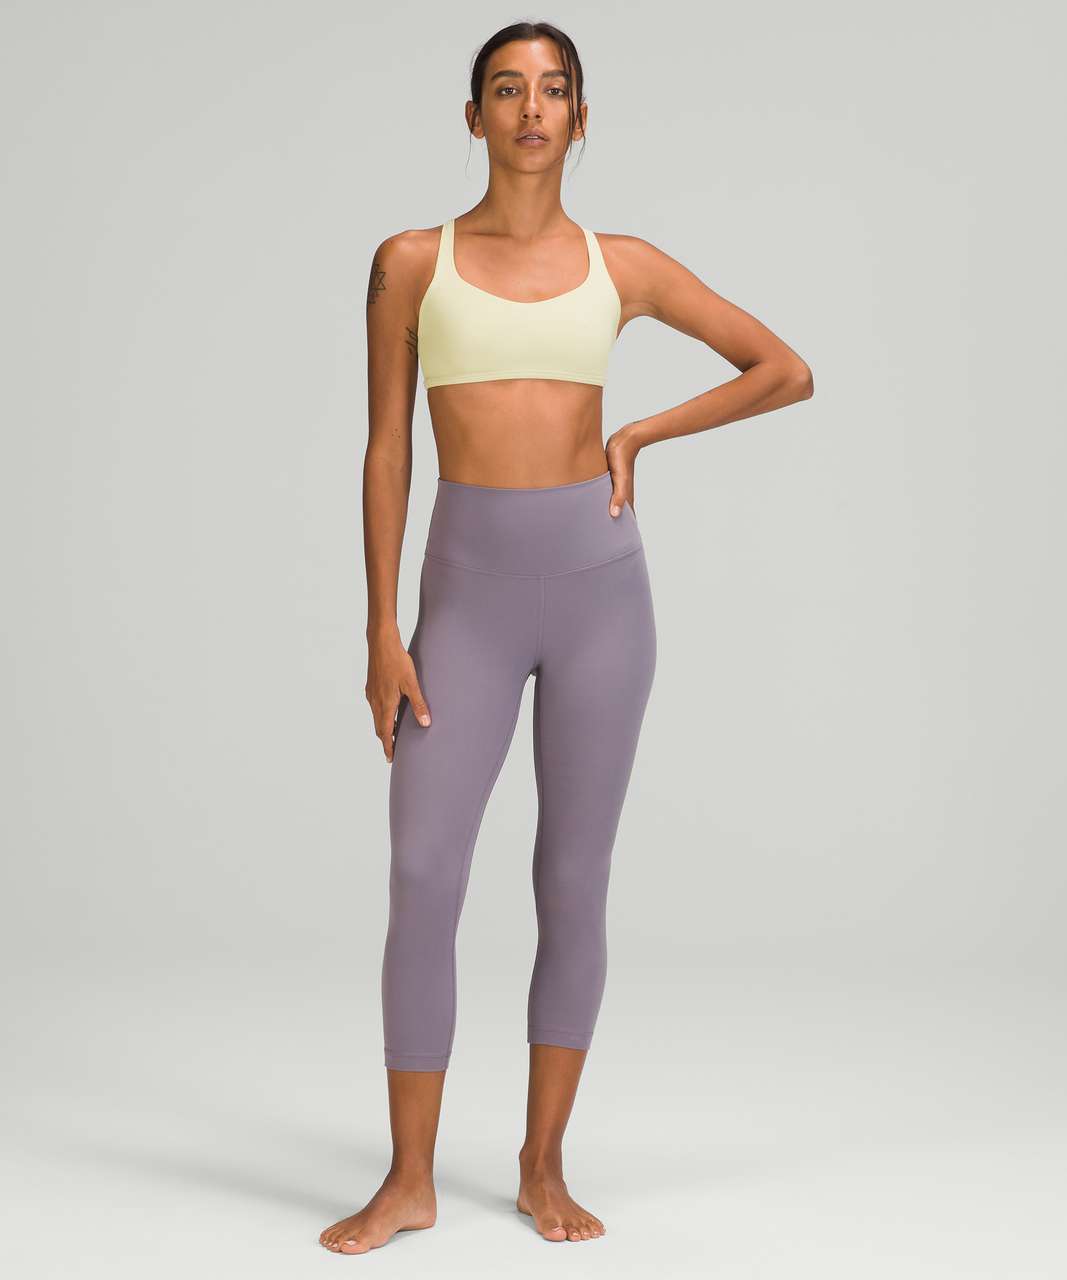 Lululemon Free to Be Bra - Wild *Light Support, A/B Cup - Dew Green